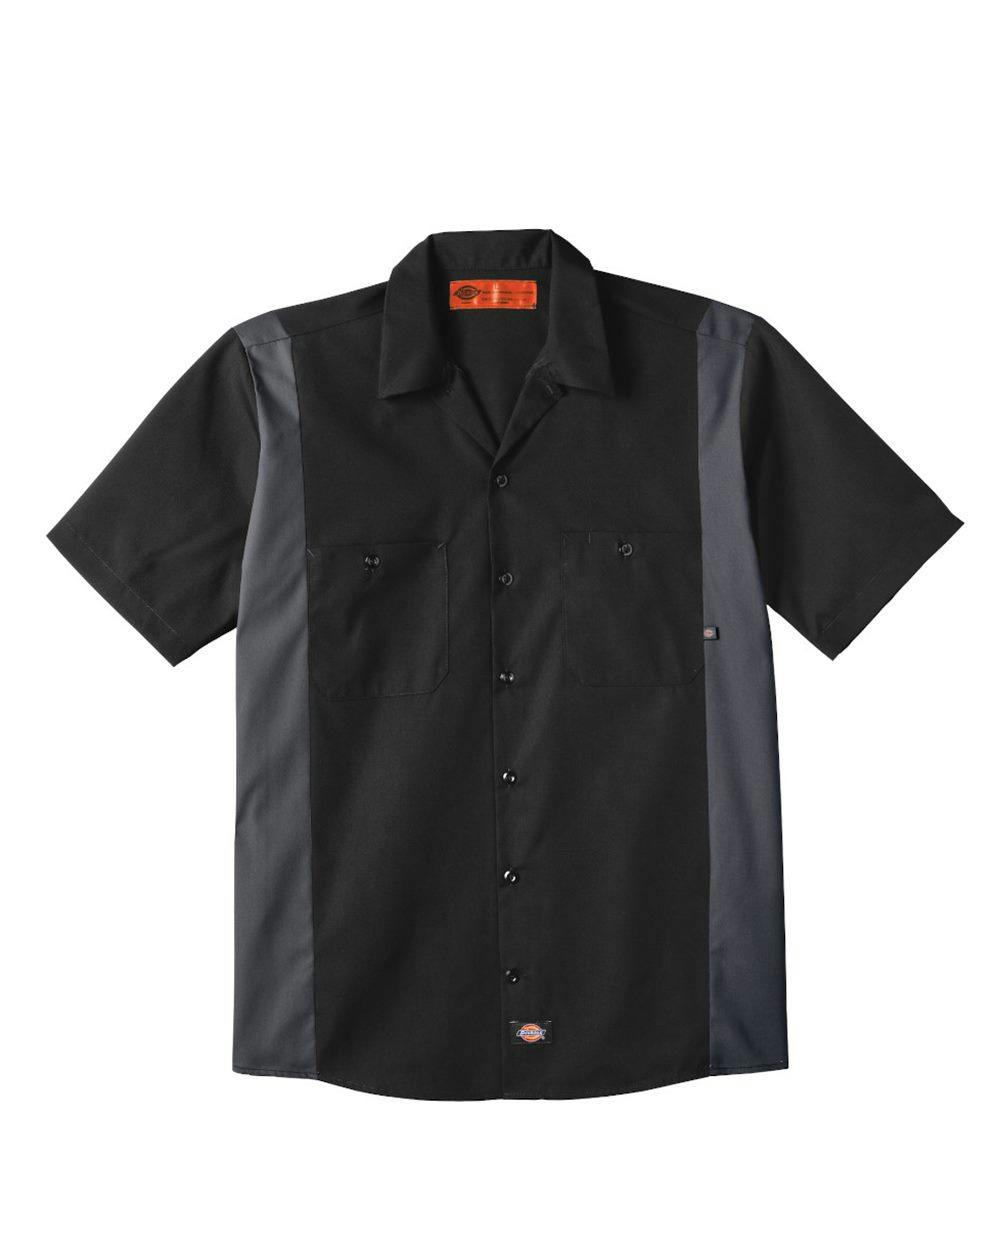 Image for Industrial Colorblocked Short Sleeve Shirt - LS524